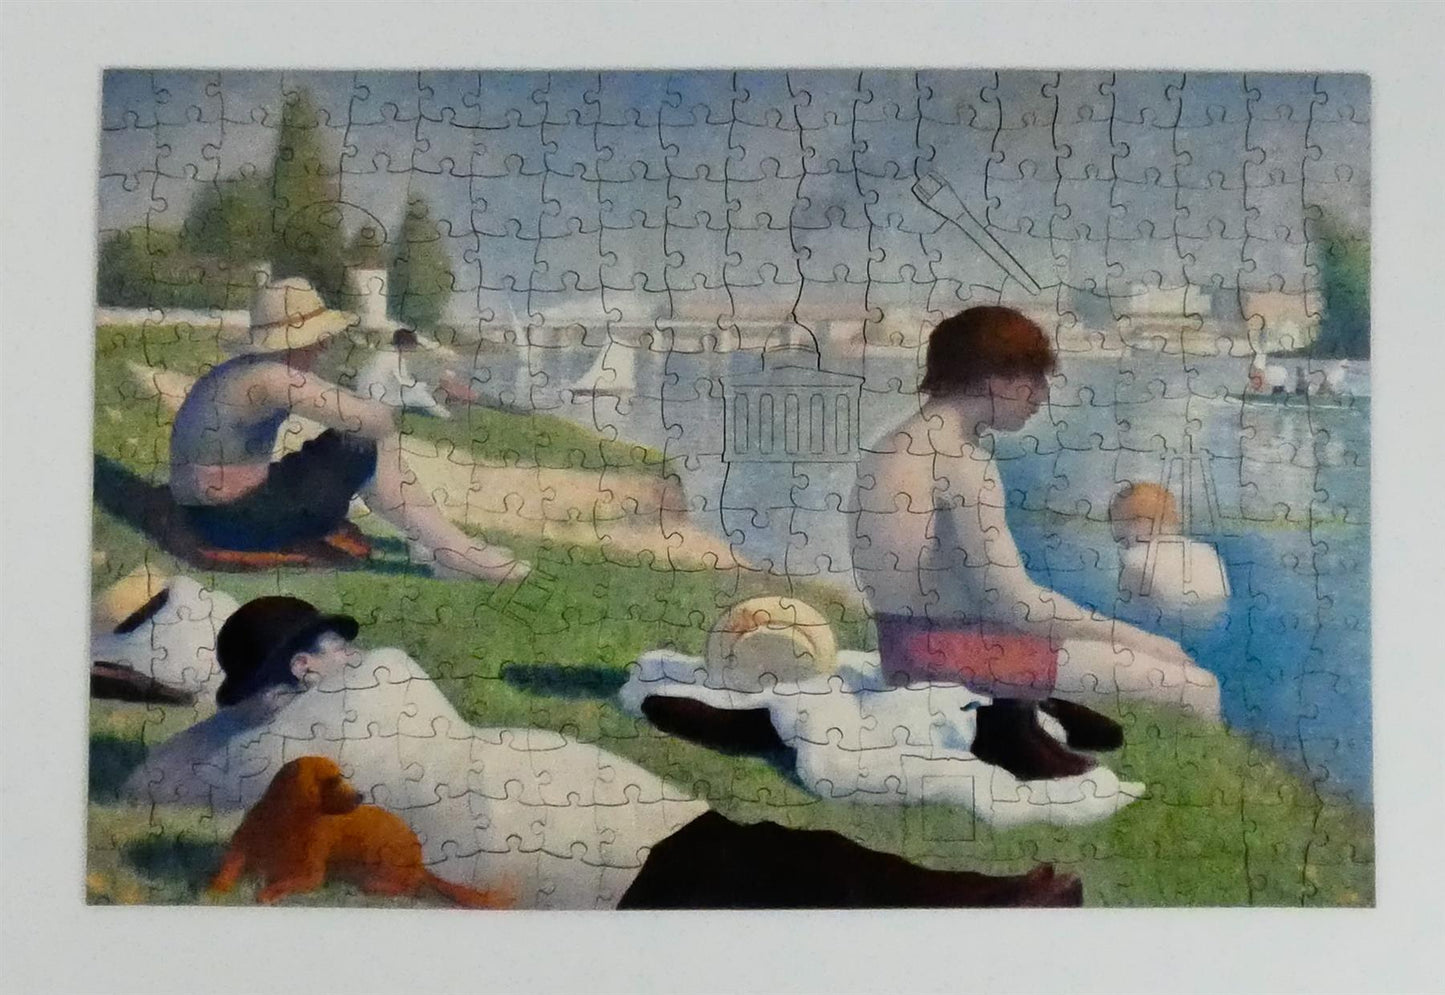 Bathers at Asnieres - National Gallery 300 Piece Wooden Jigsaw Puzzle